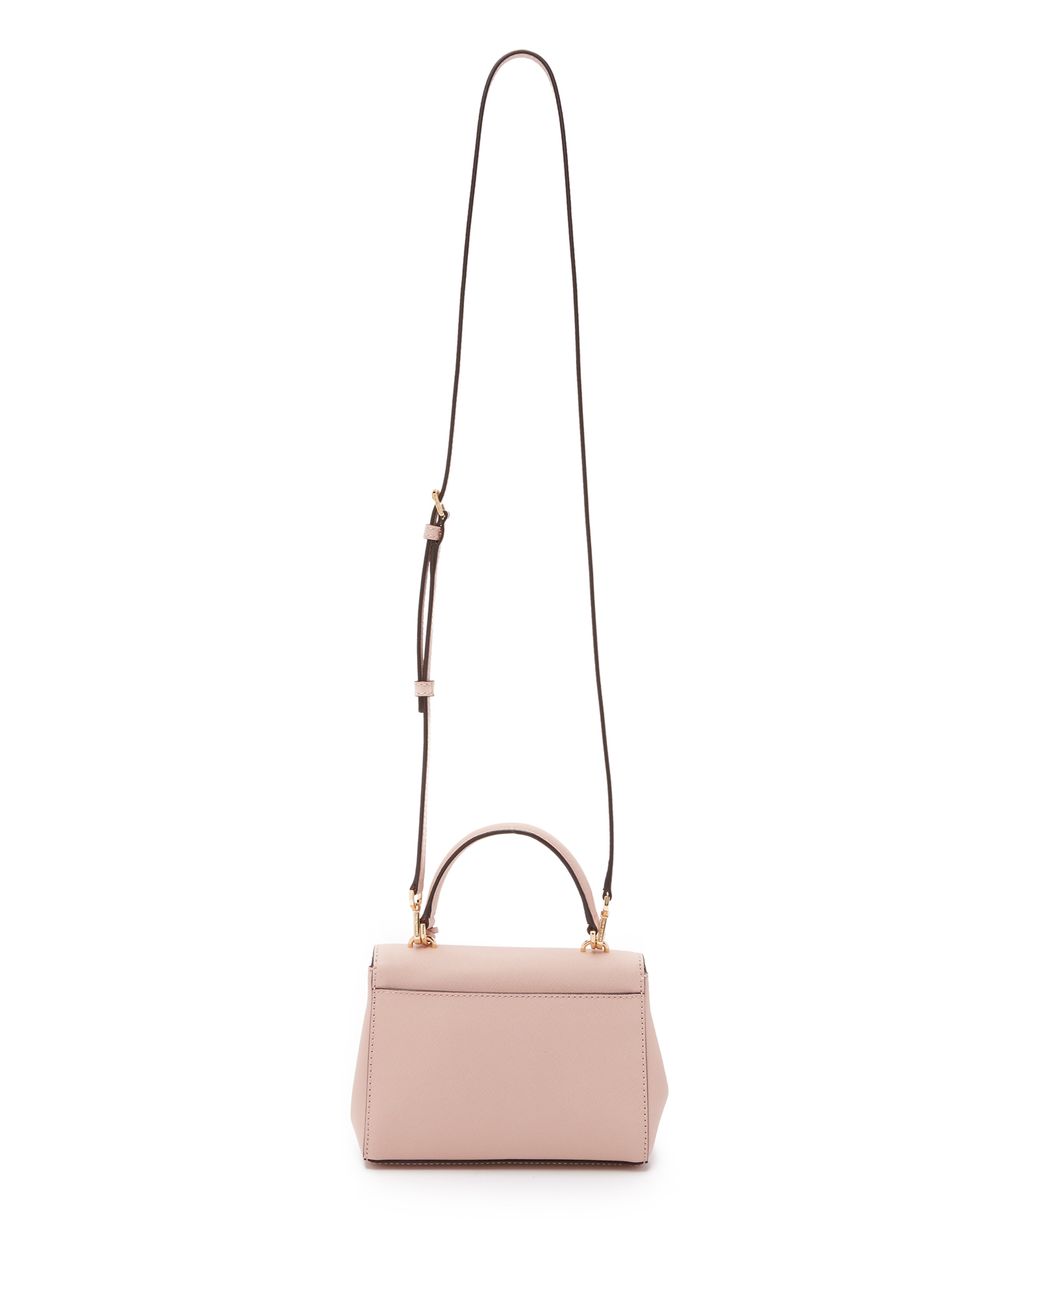 MICHAEL Michael Kors Ava Extra Small Leather Crossbody Bag in Natural